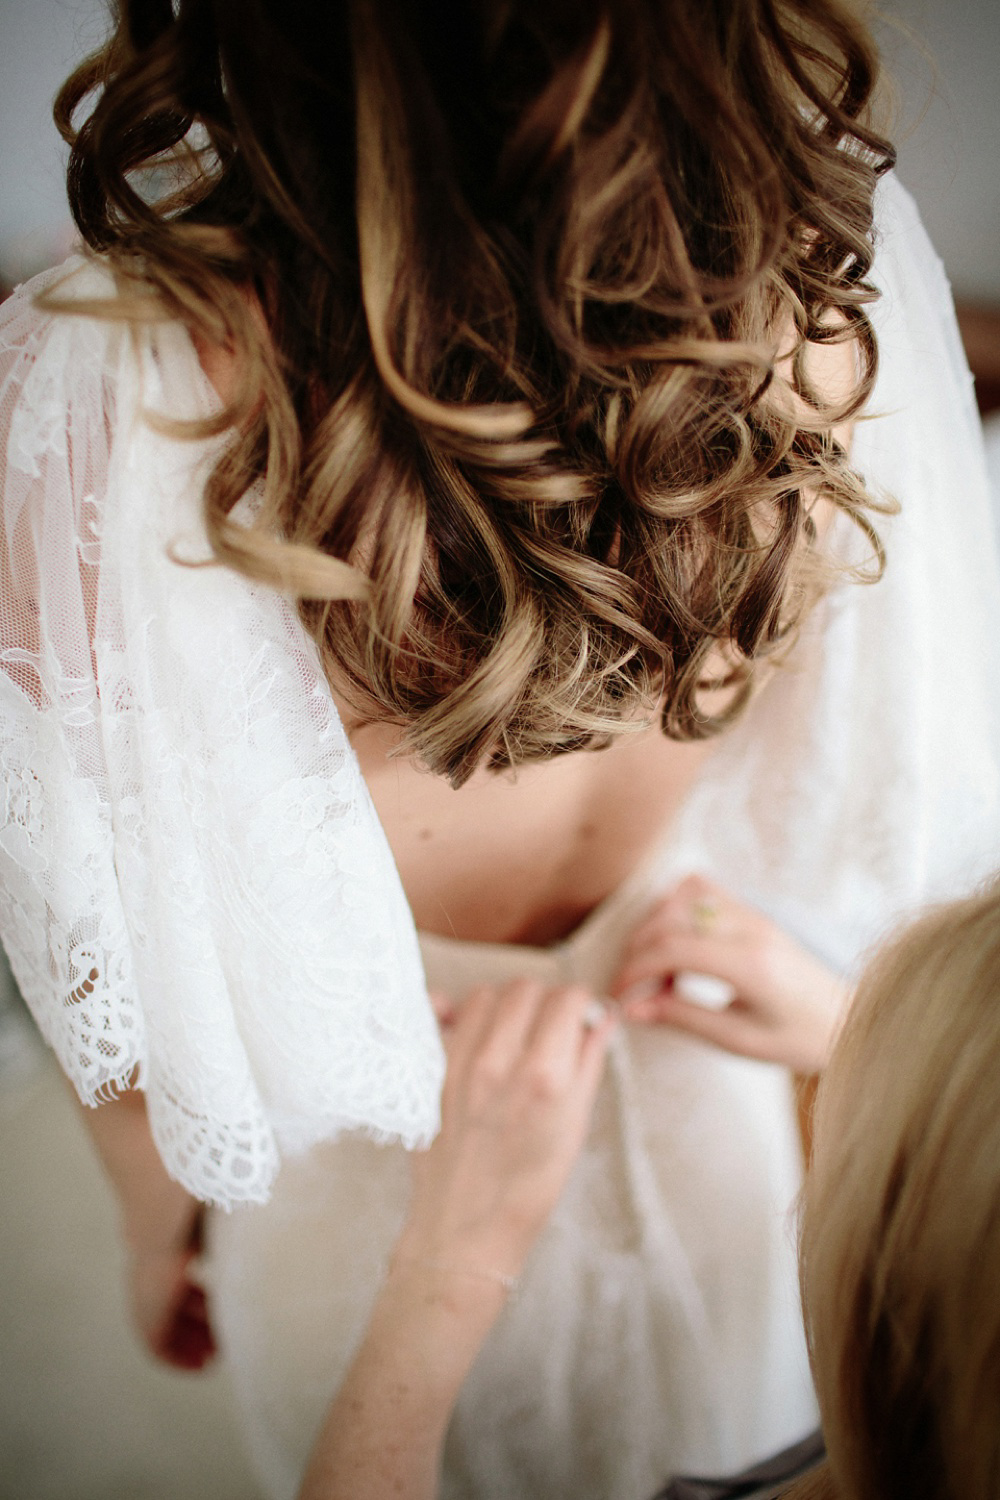 Ivy and Aster Lace for an Elegant No Frills Style Wedding